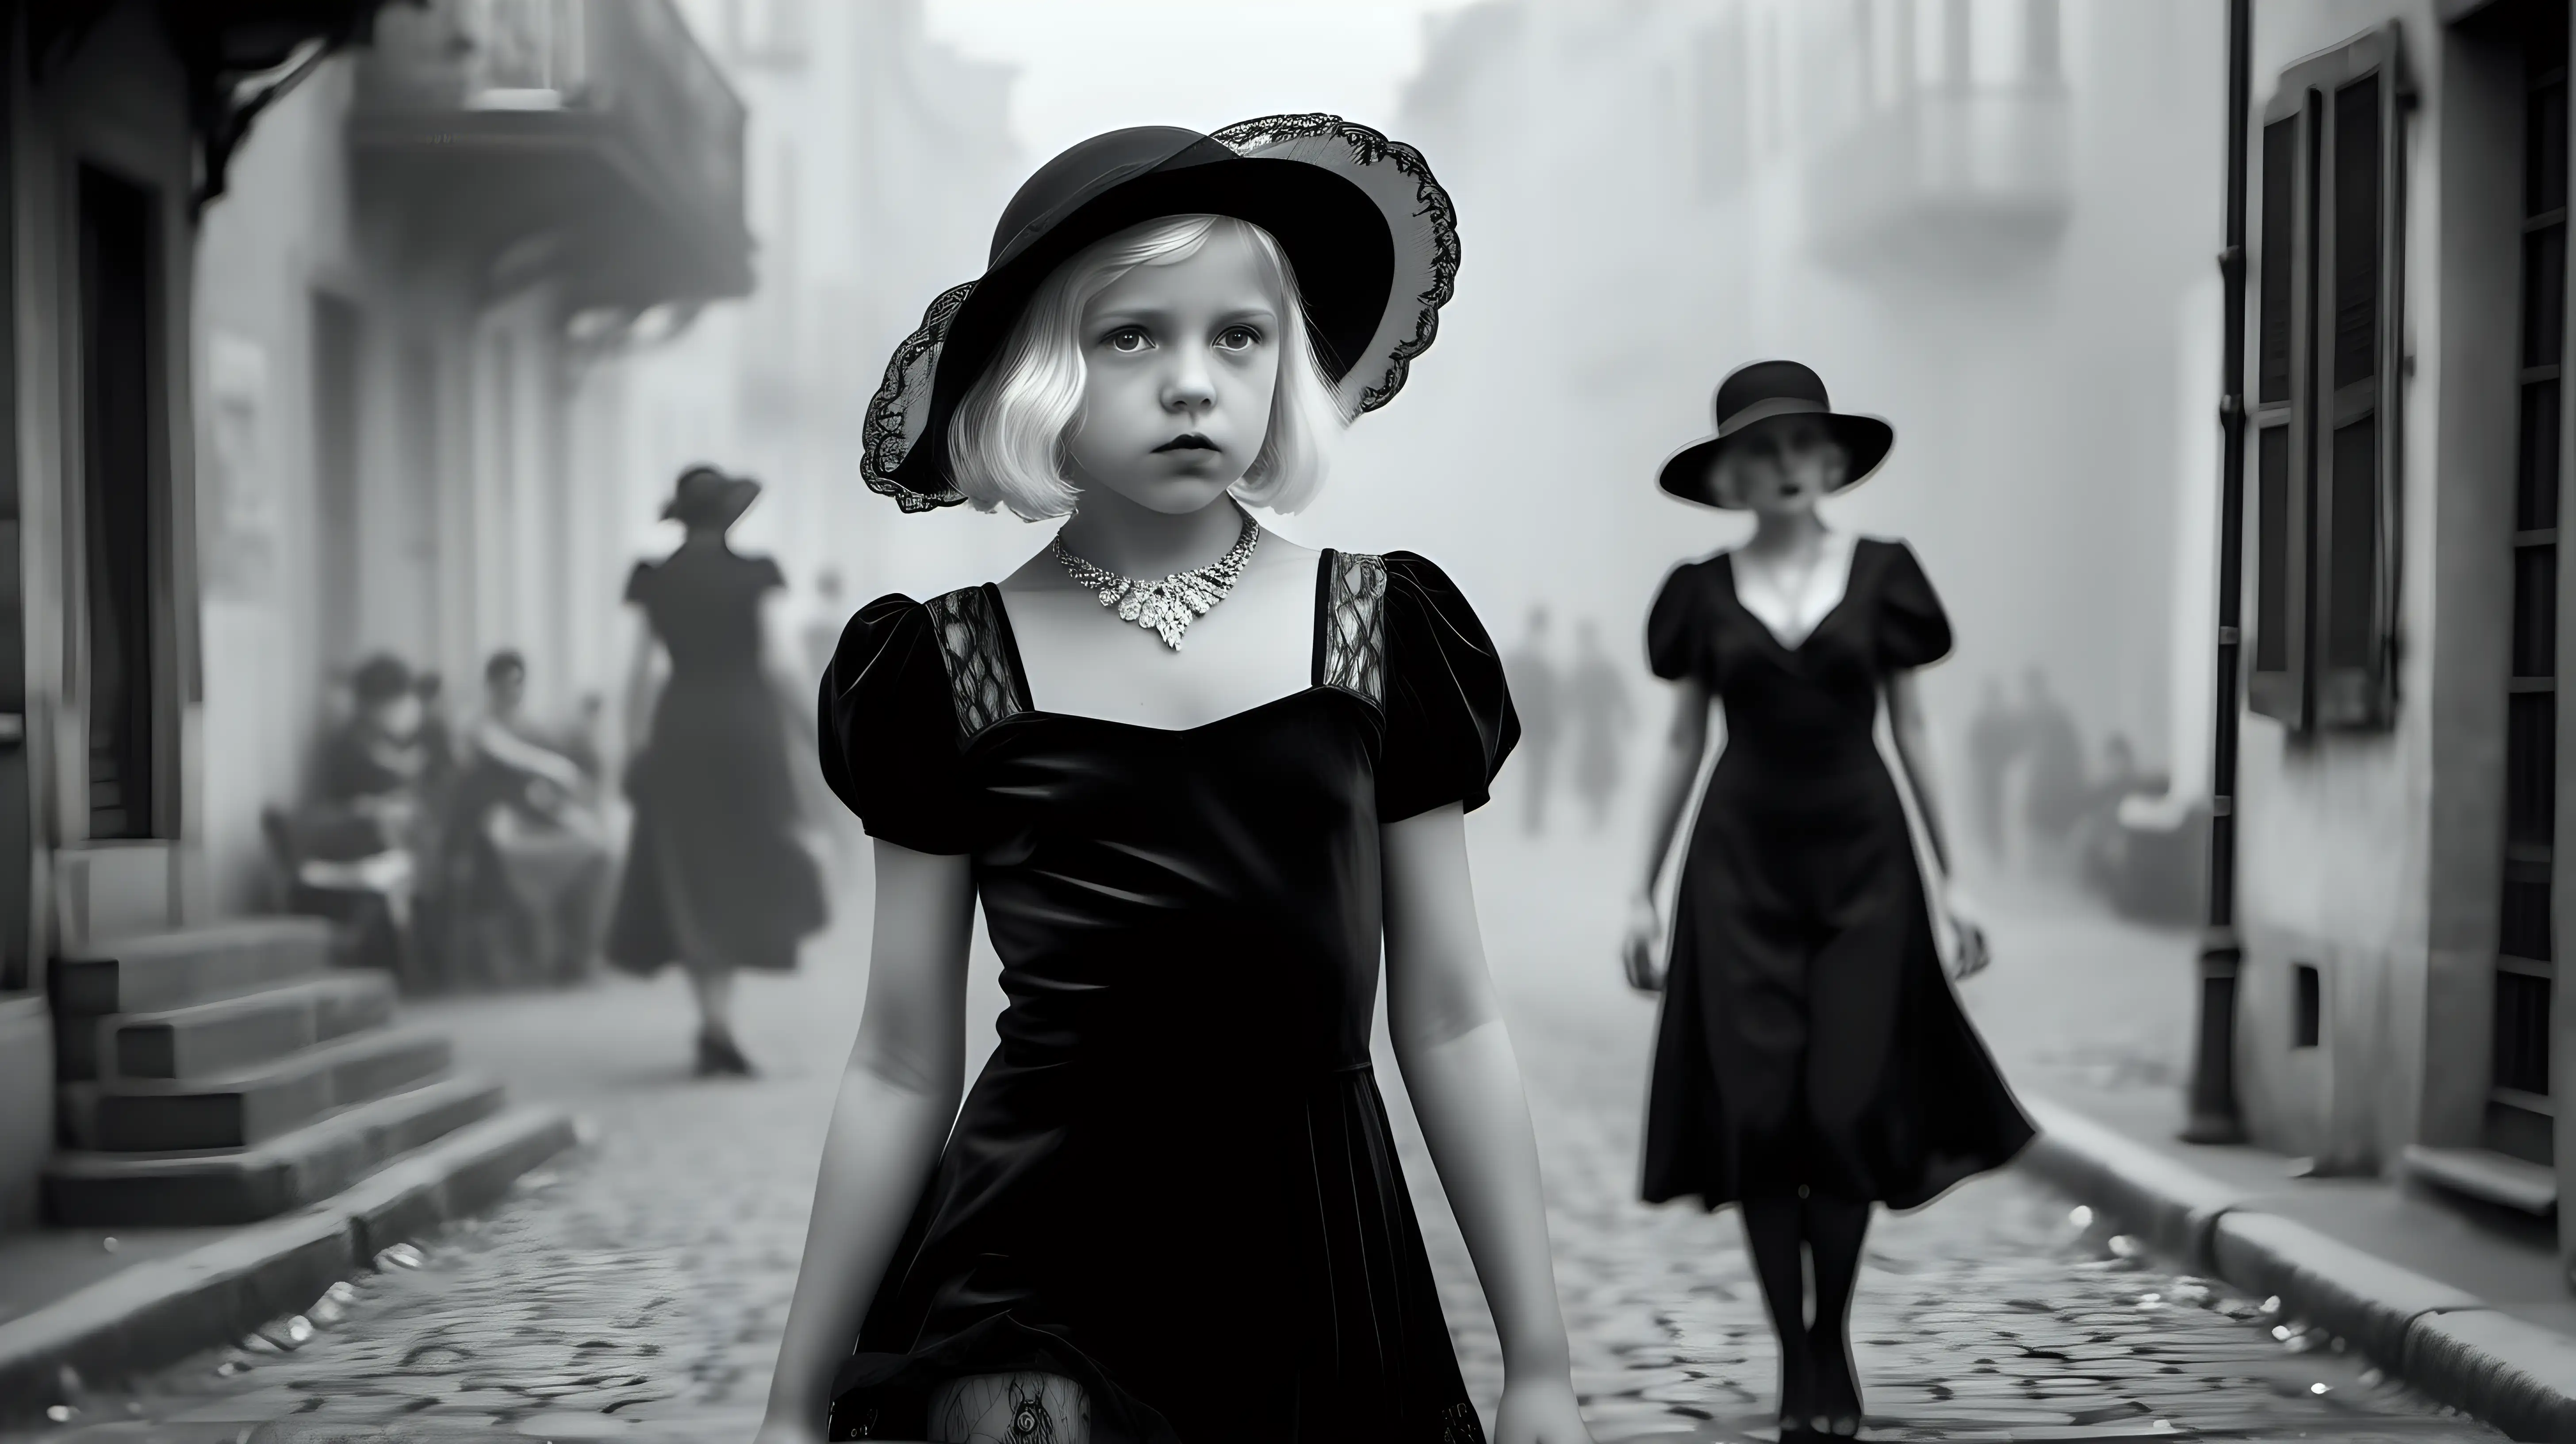 photo of a young little 8yr girl
Black and white photography
fog
diffuse light 
hd ,8k,realistic,photorealistic,photography,ultra-detailled,high resolution,Canon Eos R5,dslr,ISO 100,Shutter speed 1/1000

A wealthy young little 8yr girl, she is wearing a fancy black velvet high necked long sleeved 1930s gown, she is wearing a black leather short dress, she has white-blonde hair and pale  eyes, she is wearing a black lace hat, she is walking down a historic French city waterfront street, she has an angry expression, behind her are two younger white-blonde women in short-sleeved black 1930s voile white dress,black nylon tights, and heels stiletto, diamonds necklace, cigarette